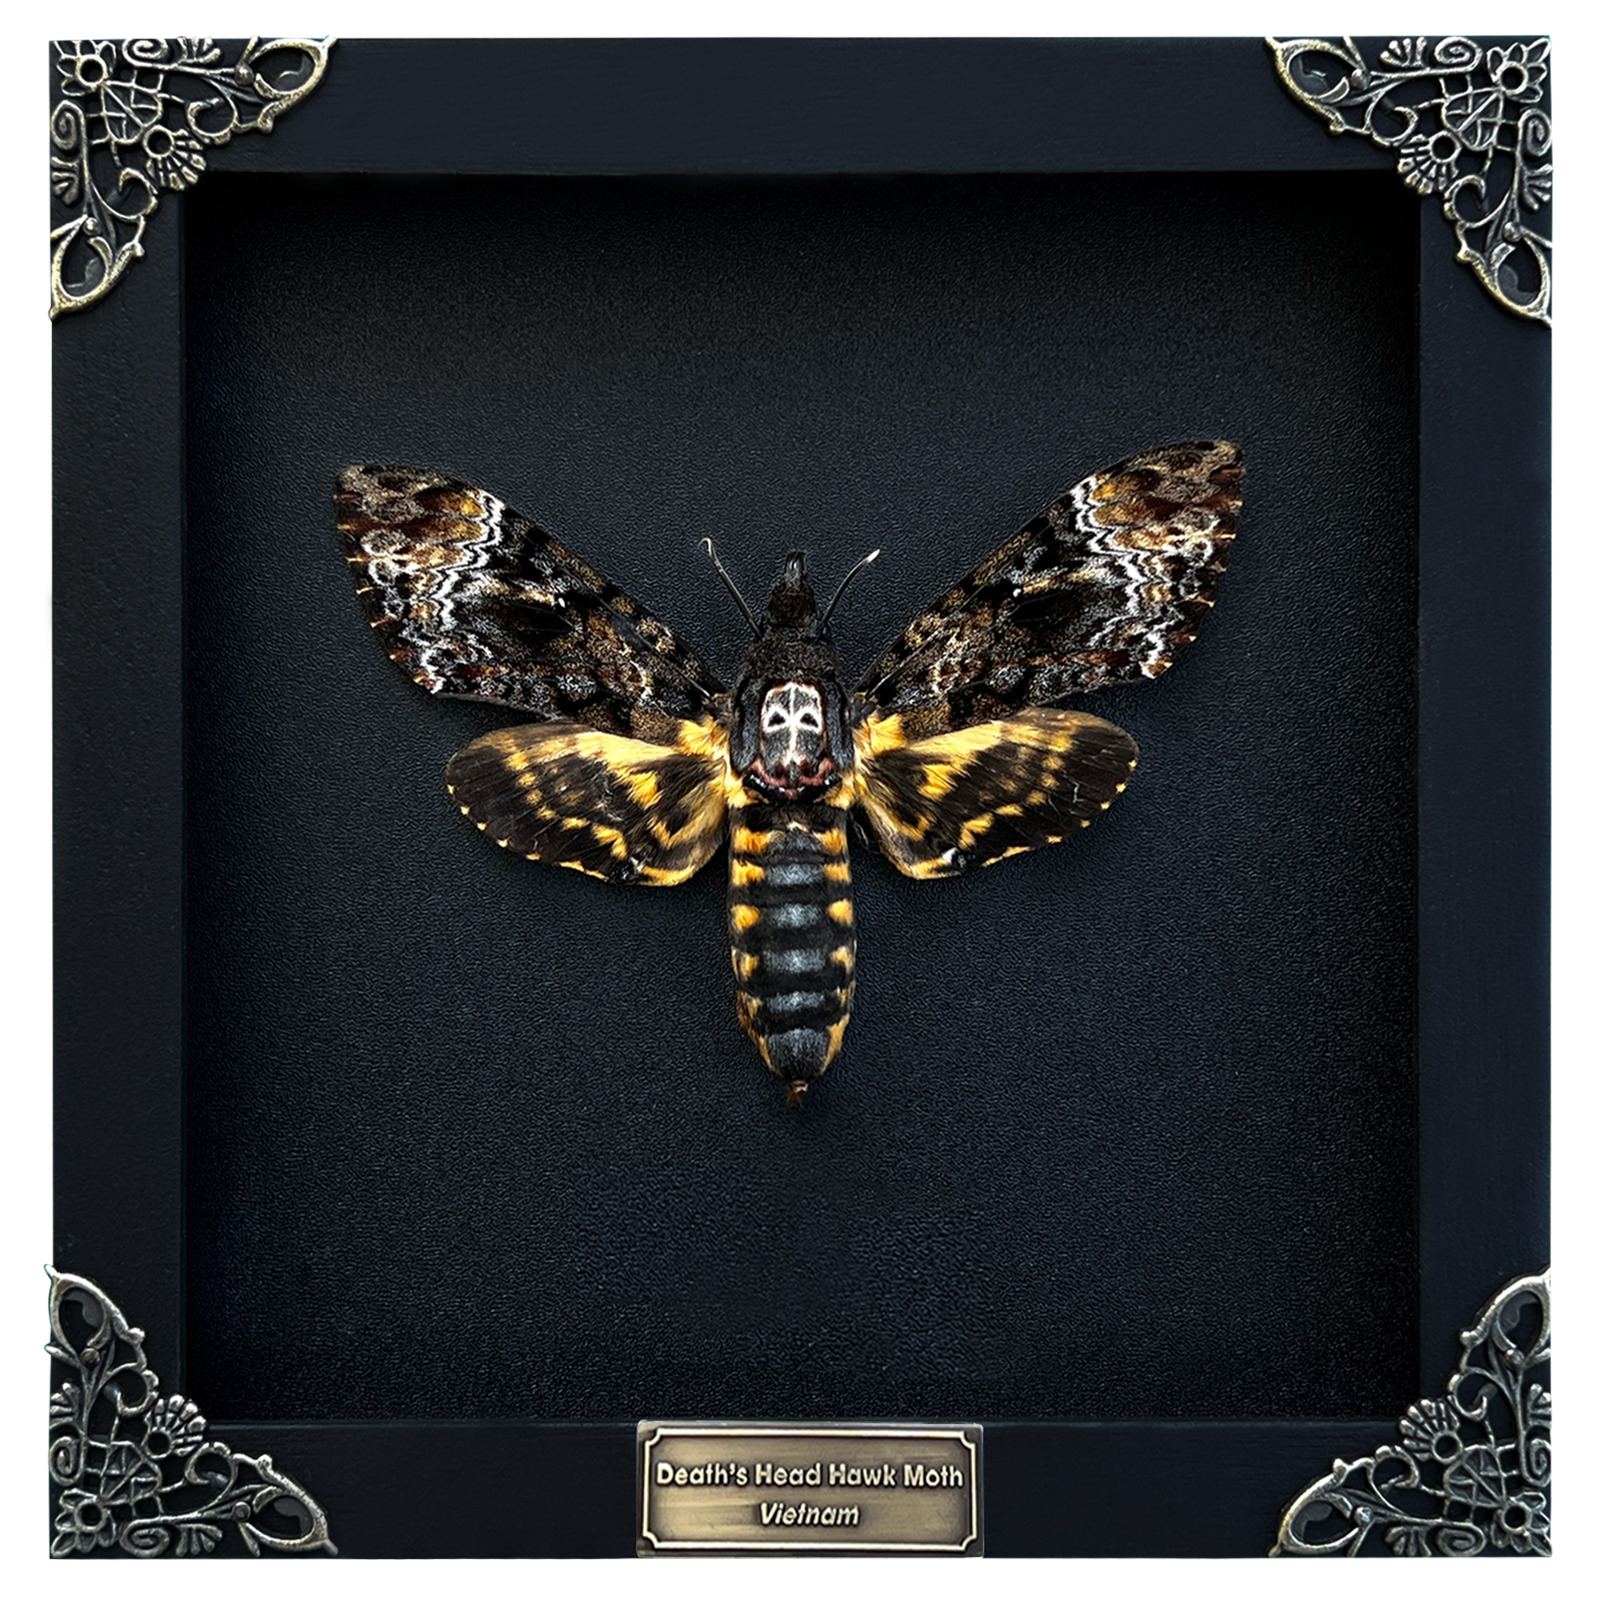 Real Framed Death Head Moth Skull Acherontia Butterfly Insect Taxidermy Oddities